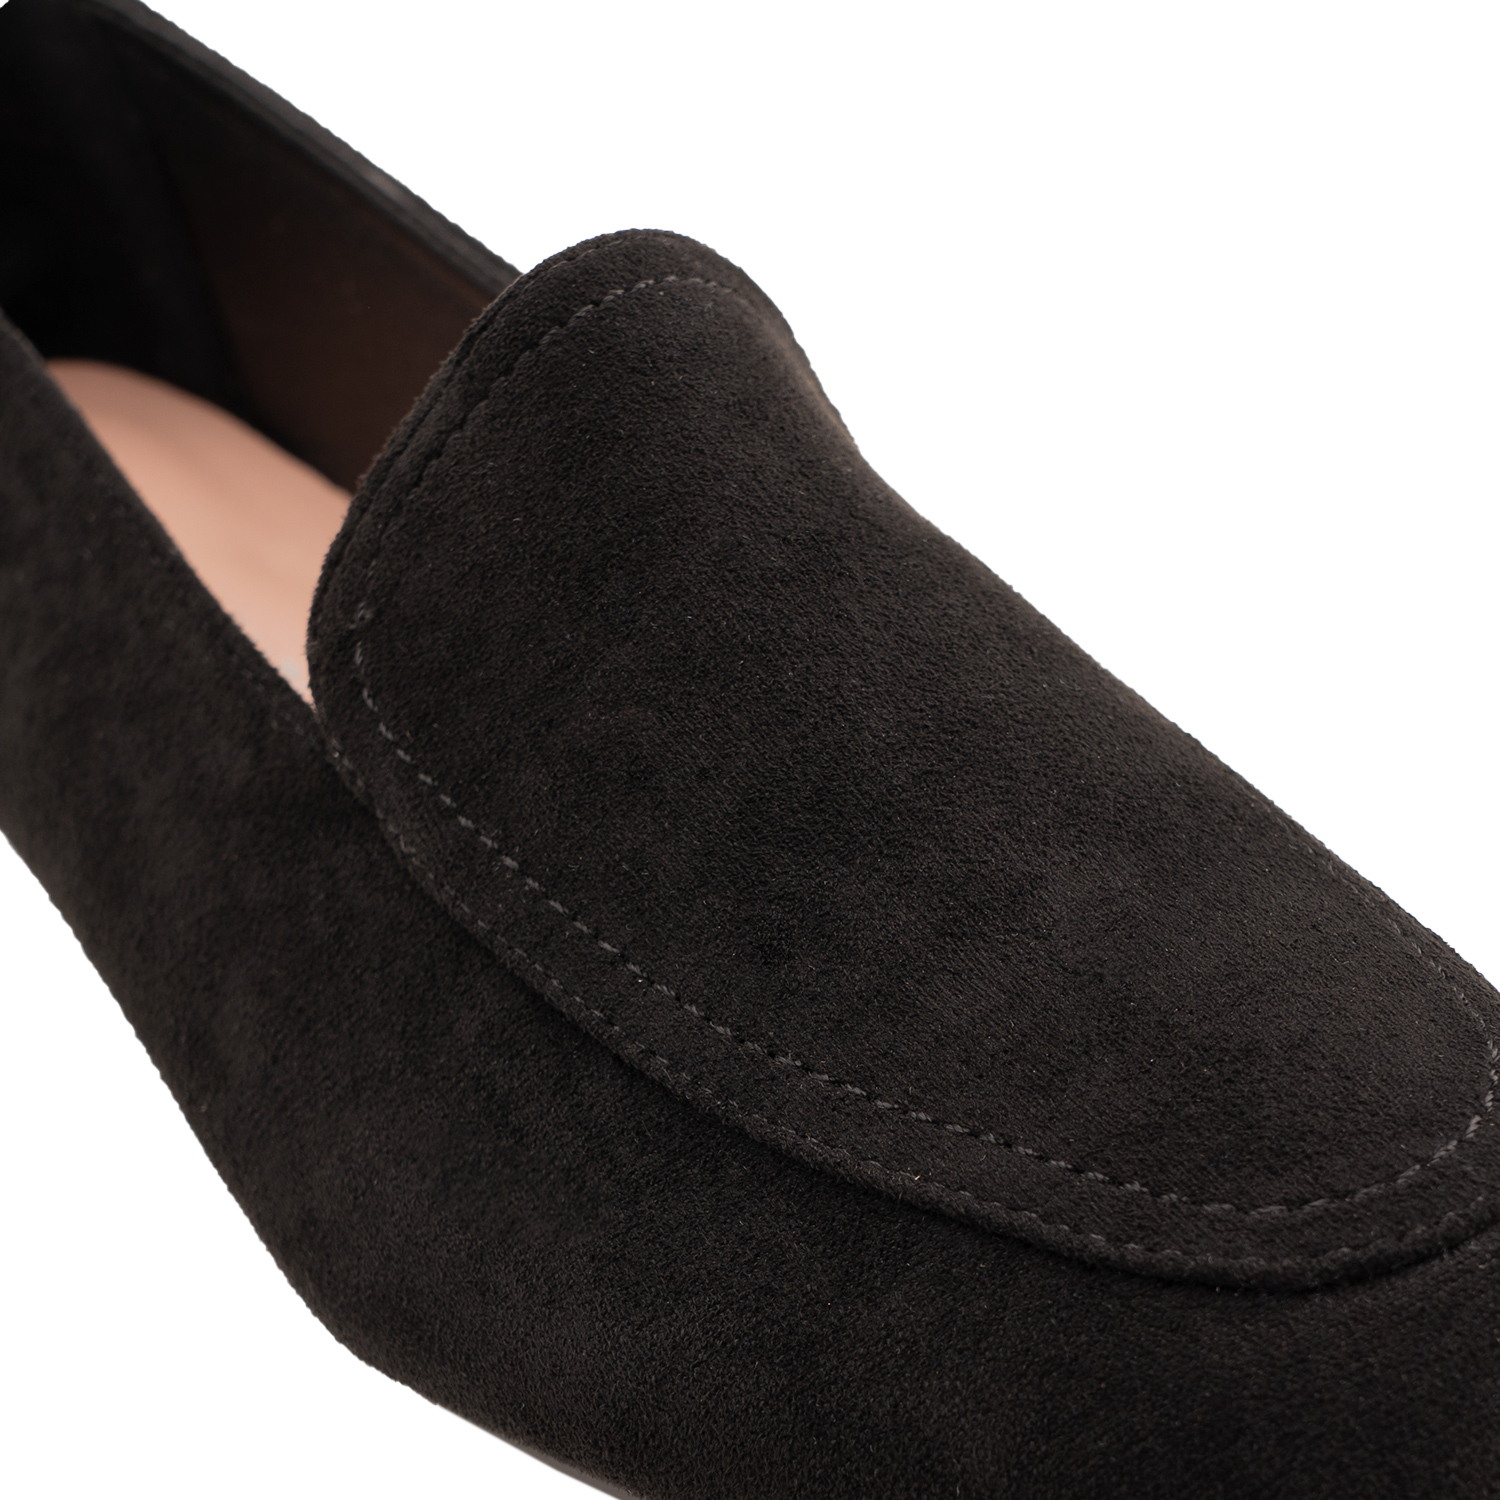 Moccasins in black faux suede 